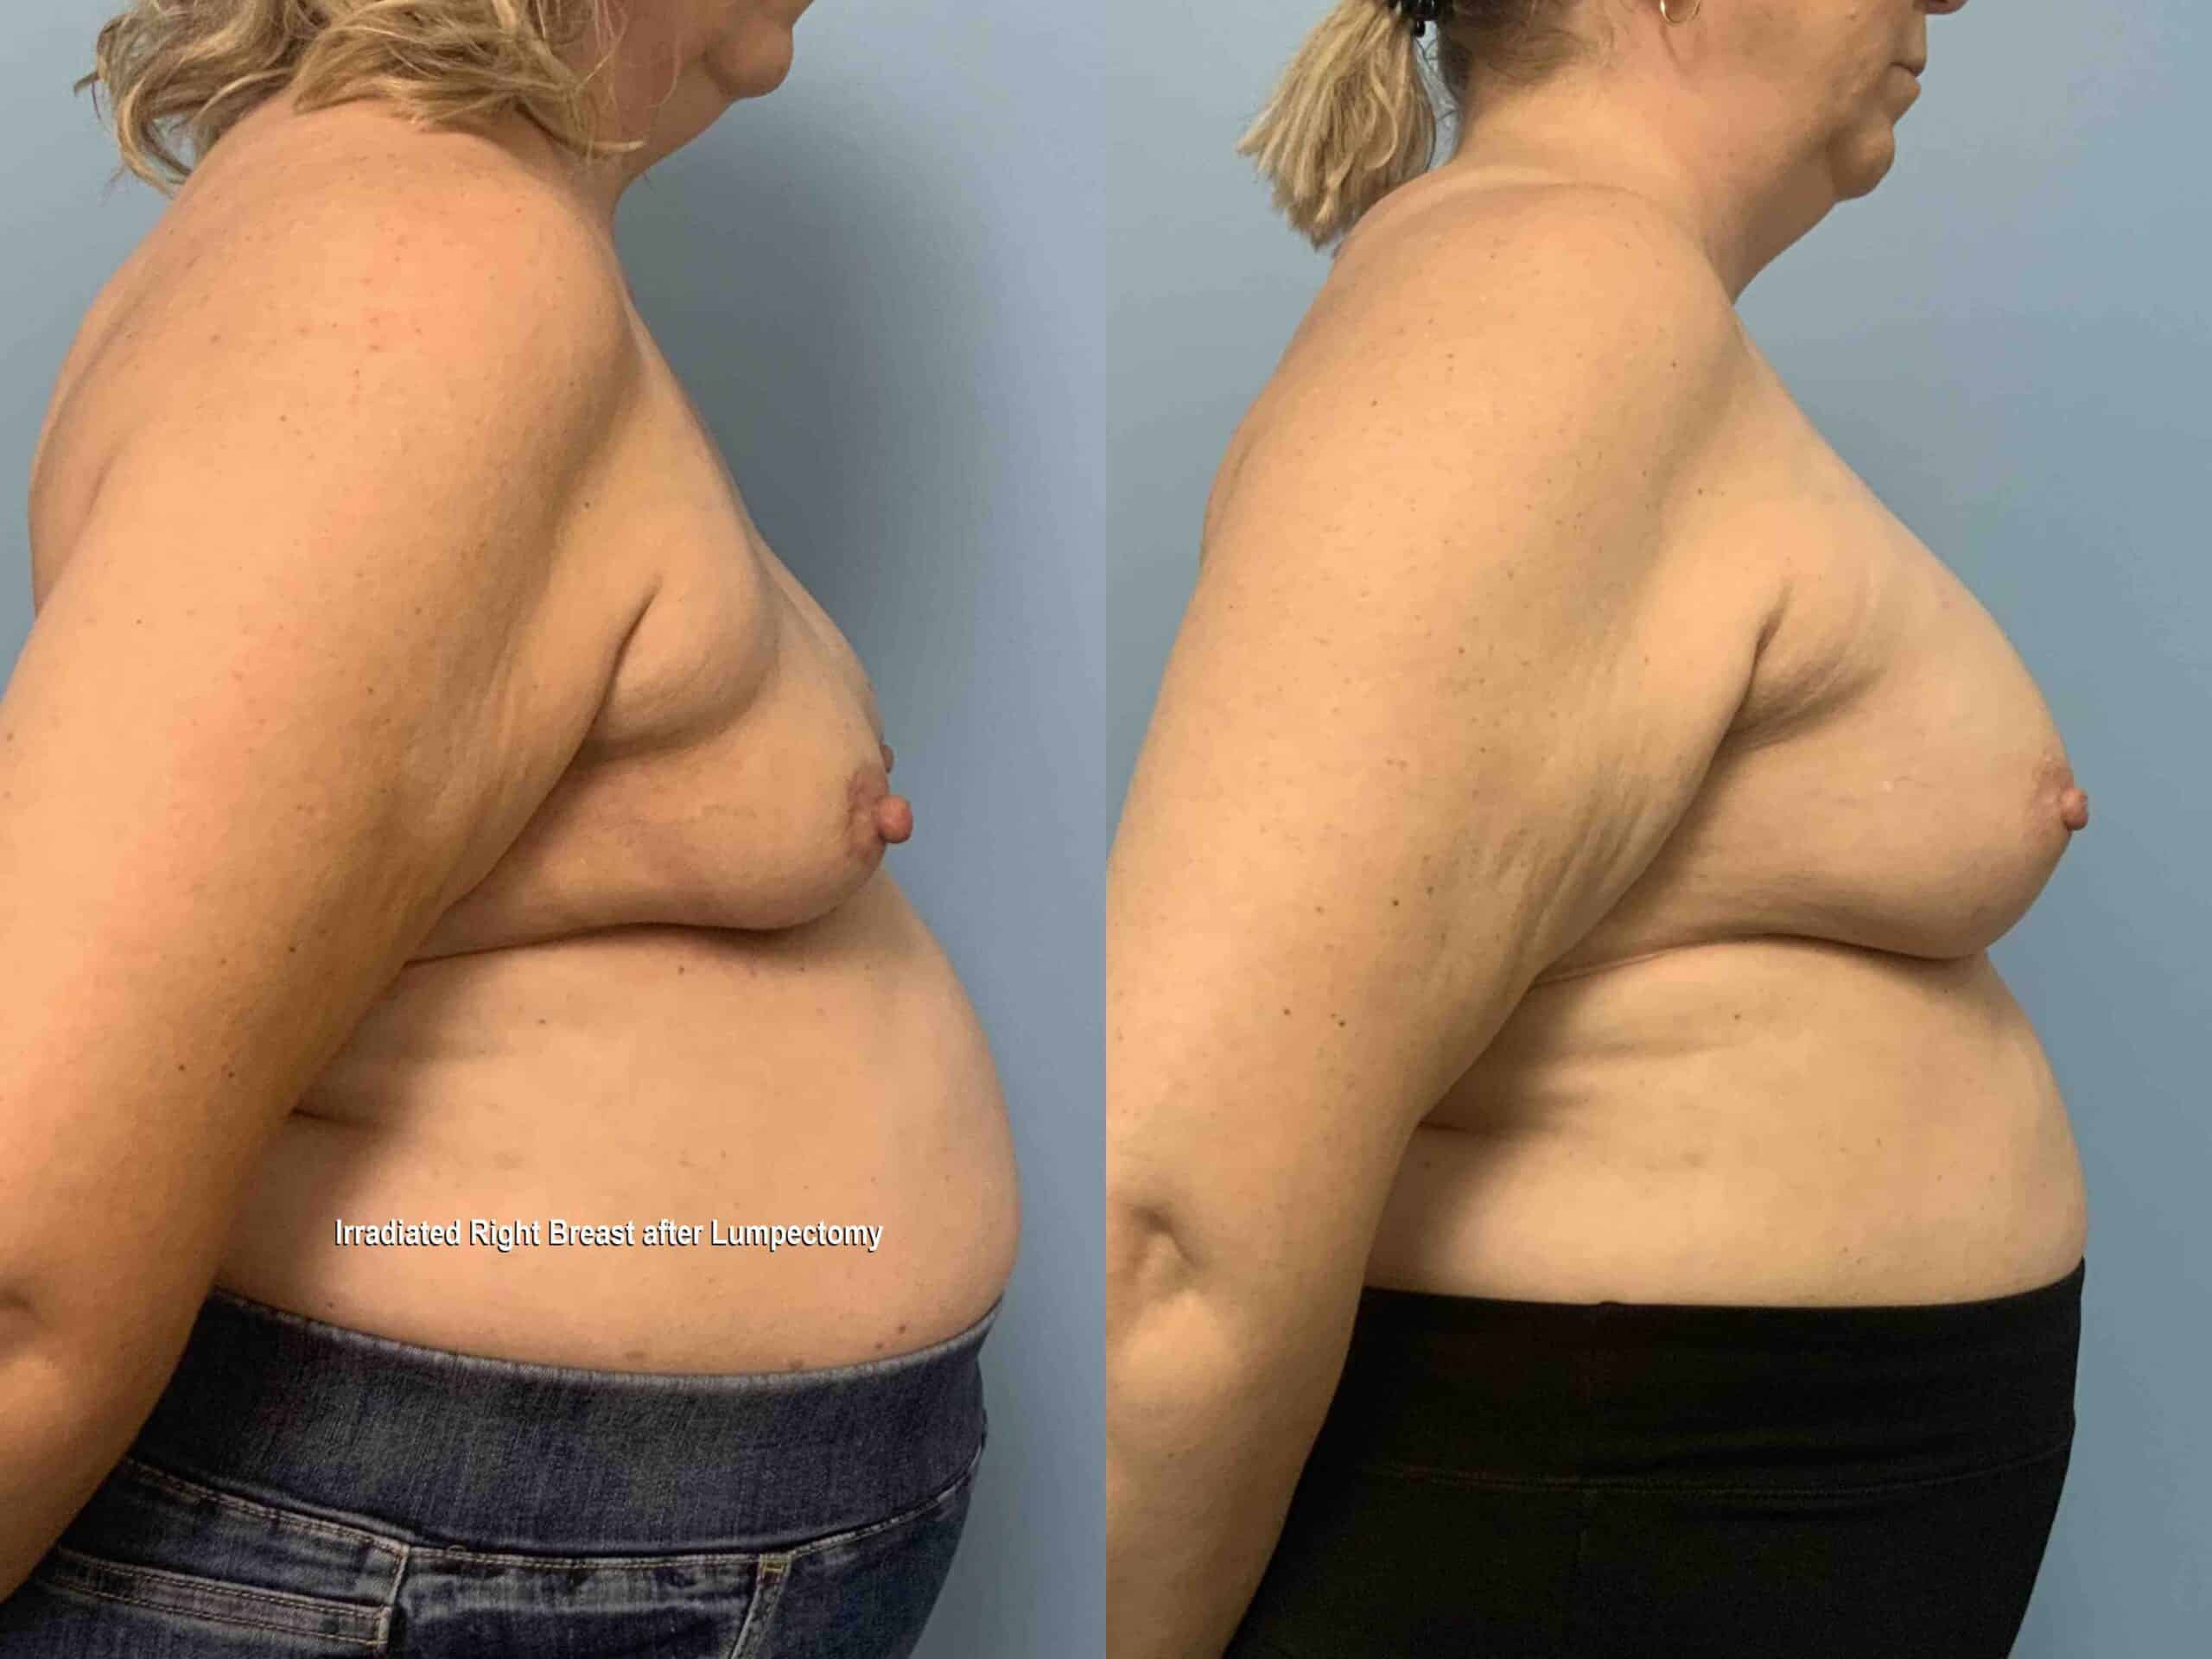 Before and after, 2 mo post op from Right Irradiated Breast Reconstruction, B/L Mastopexy, B/L Breast Augmentation with Alloderm performed by Dr. Paul Vanek (side view)